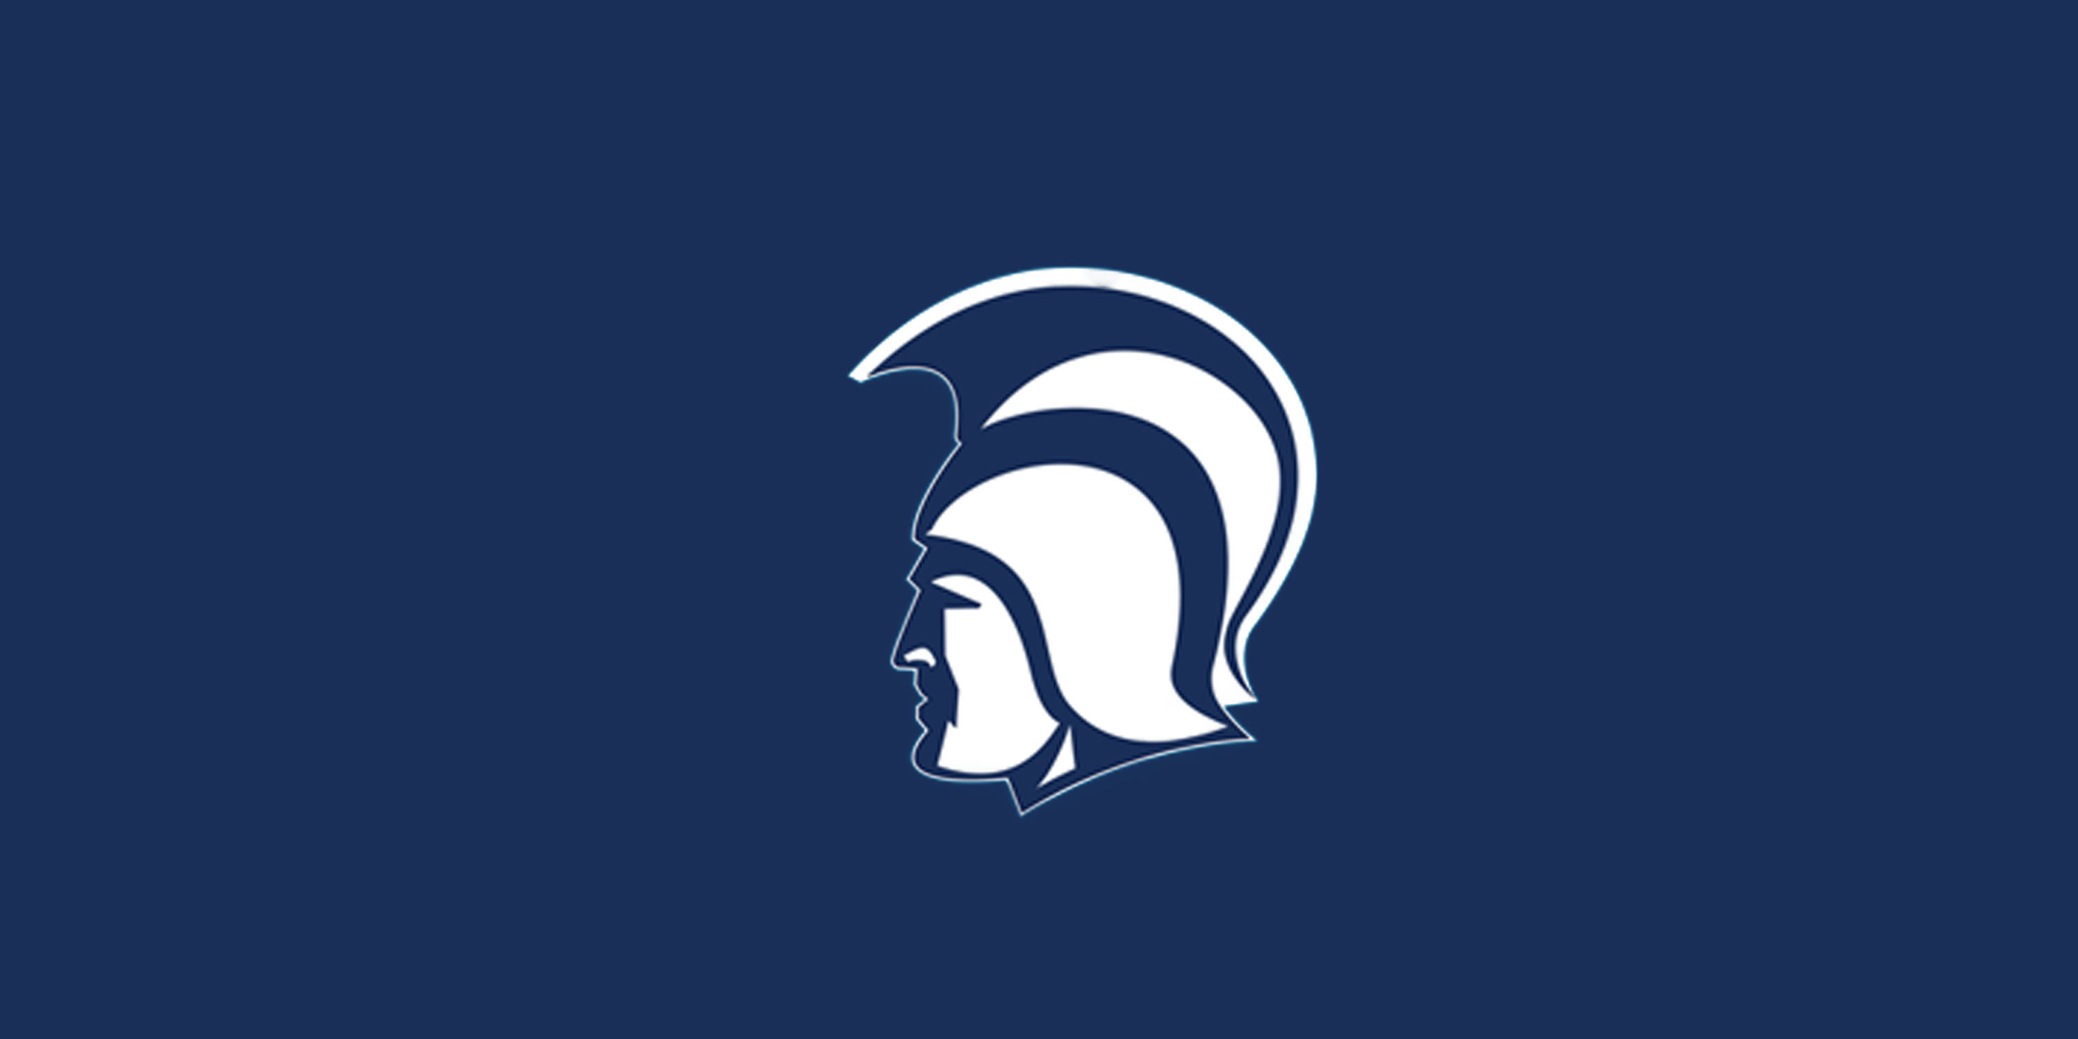 Spartan Head with Navy background.